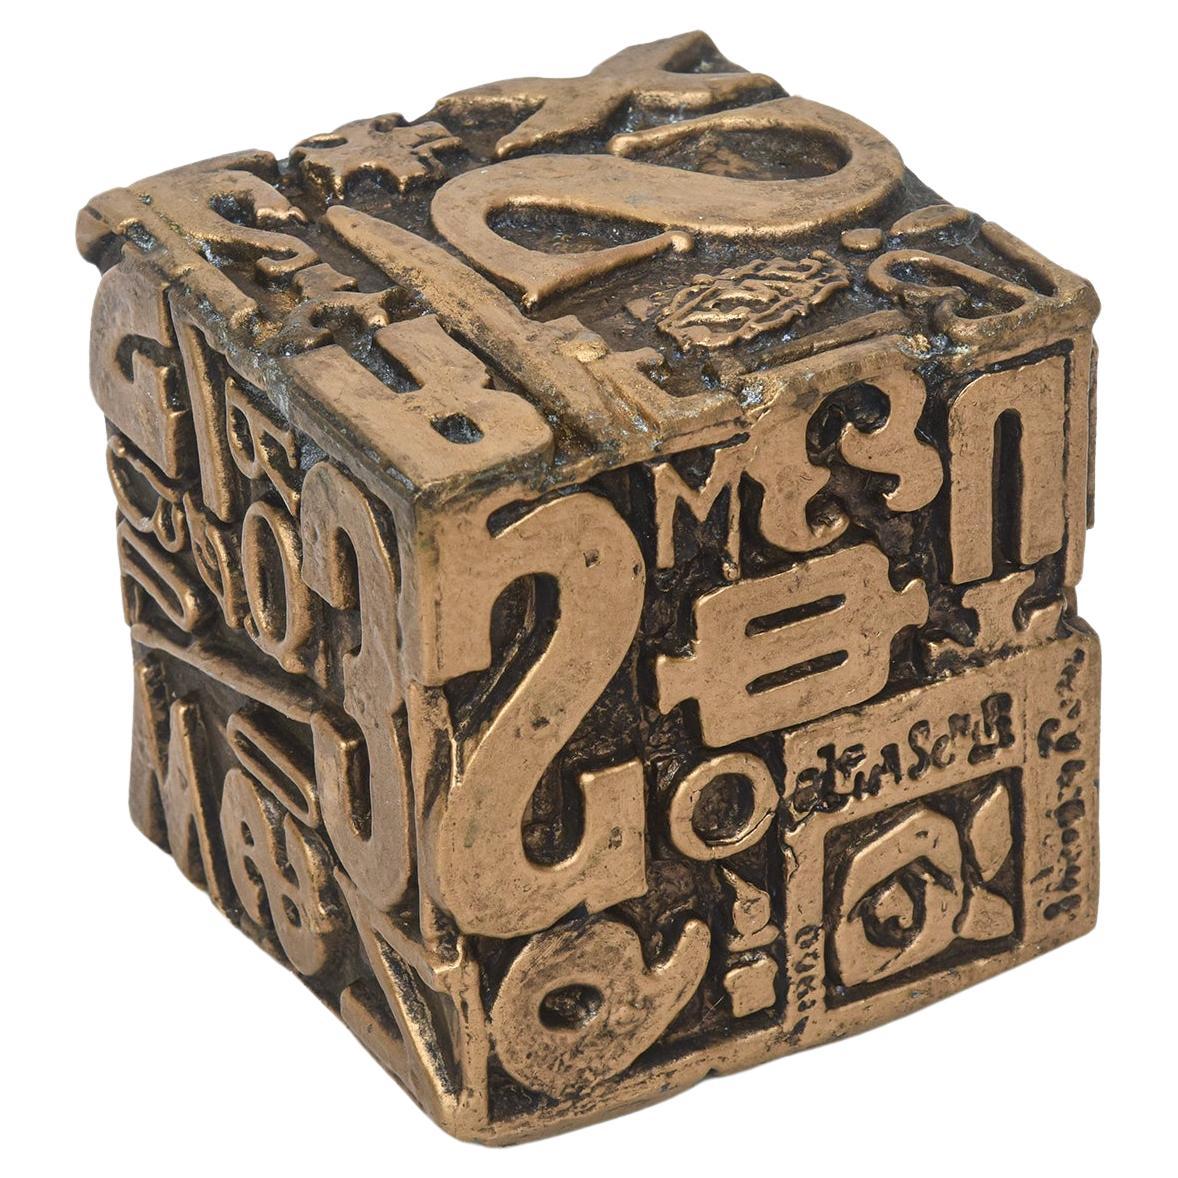 Sheldon Rose Vintage Alpha Typographic Cube Sculpture Mixed Media For Sale